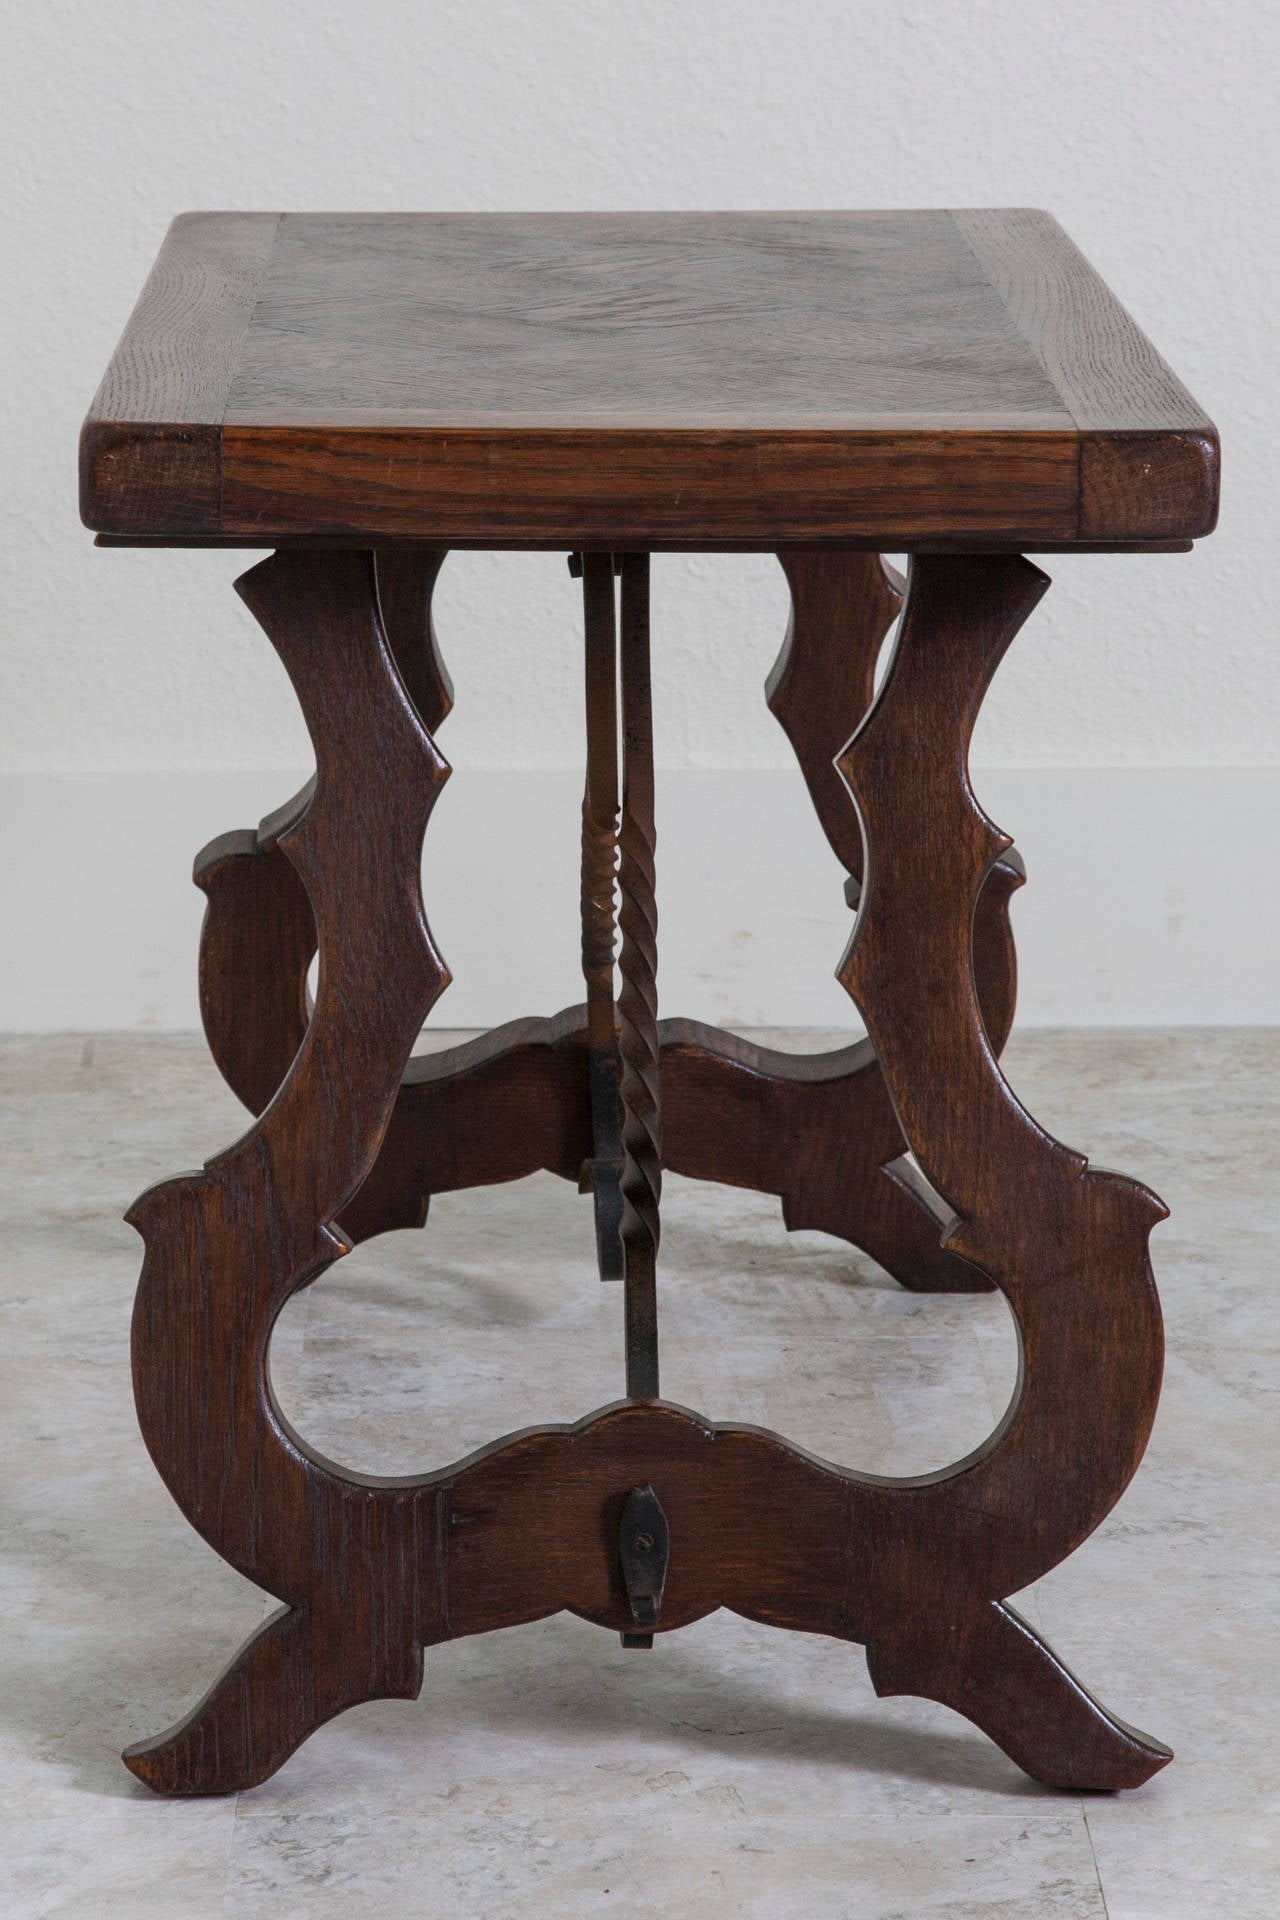 This handsome little coffee table has been constructed in the manner of a large Spanish Renaissance table. The hand-forged iron stretchers, parquet top, and elegantly carved legs give this small piece a large presence. The scale of this table would